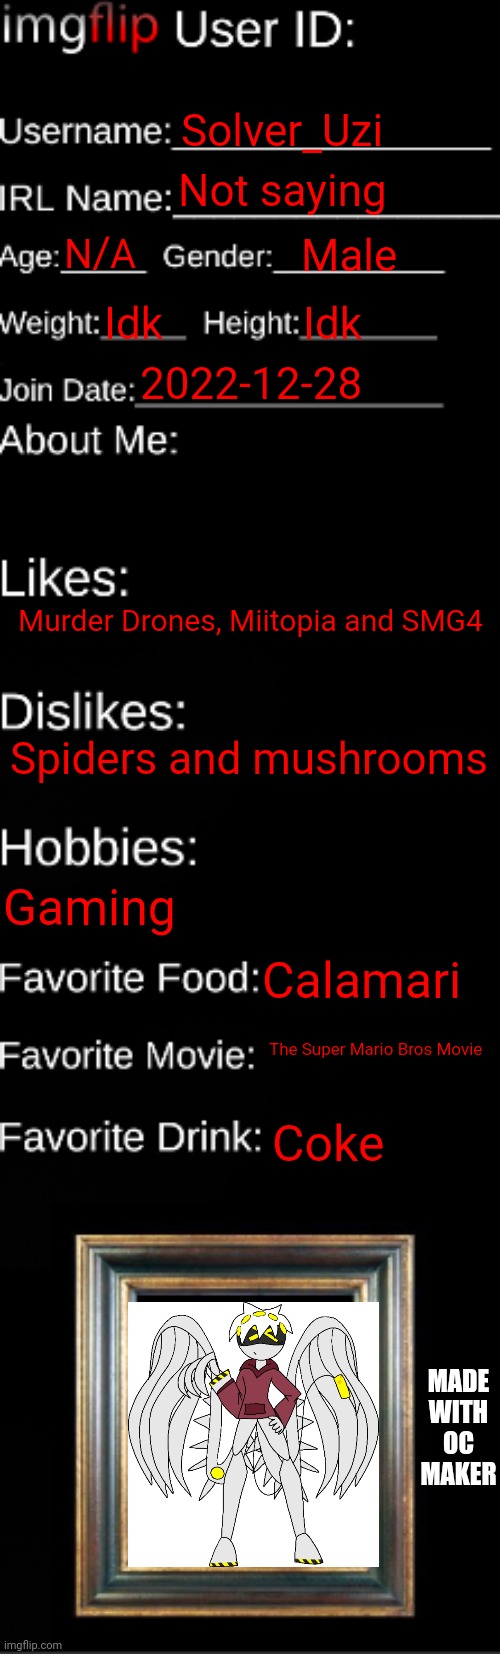 imgflip ID Card | Solver_Uzi; Not saying; N/A; Male; Idk; Idk; 2022-12-28; Murder Drones, Miitopia and SMG4; Spiders and mushrooms; Gaming; Calamari; The Super Mario Bros Movie; Coke; MADE WITH OC MAKER | image tagged in imgflip id card | made w/ Imgflip meme maker